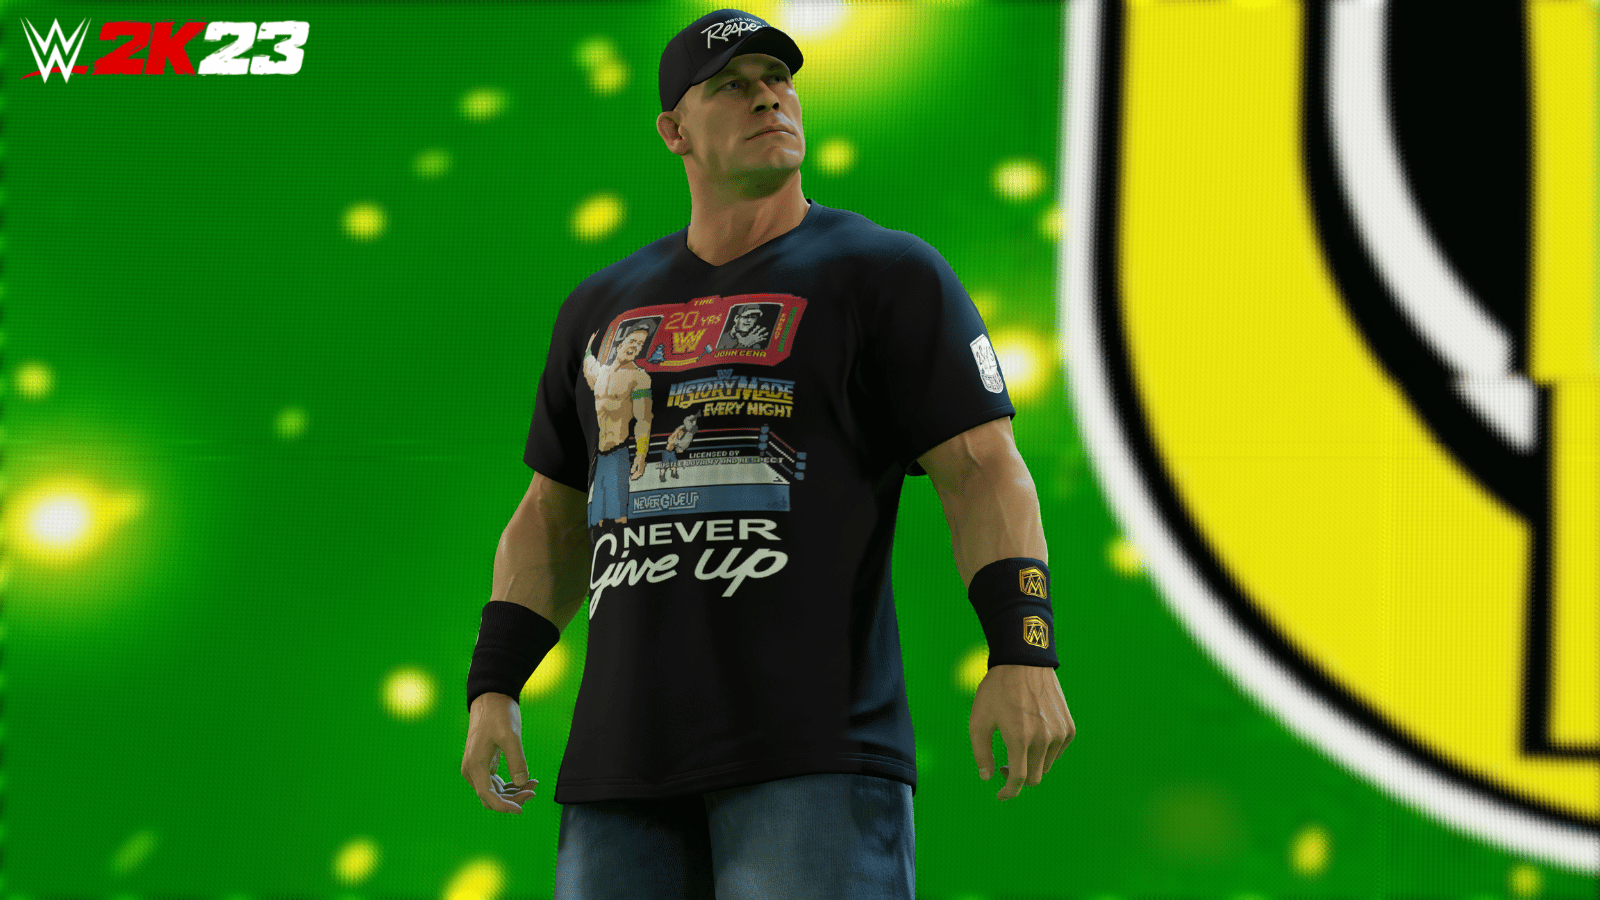 WWE 2K23 Features John Cena As The Cover Star As It Sets For March Release